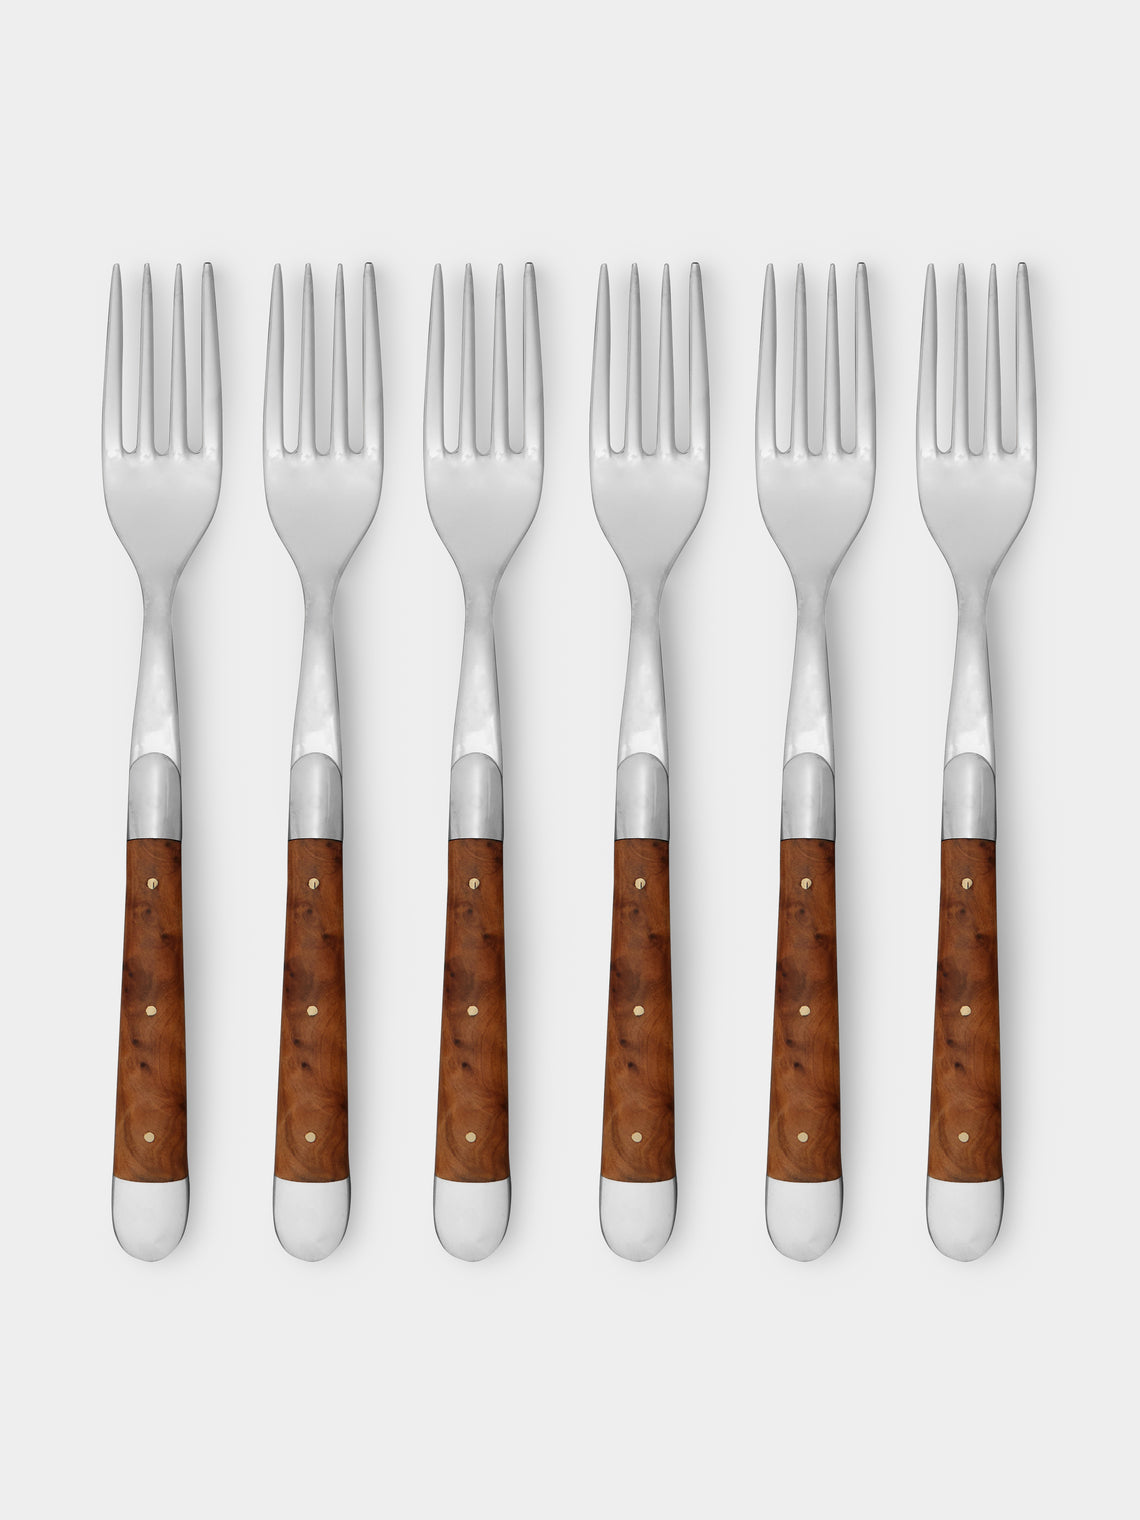 Forge de Laguiole - Thuya Wood Table Forks (Set of 6) - Silver - ABASK